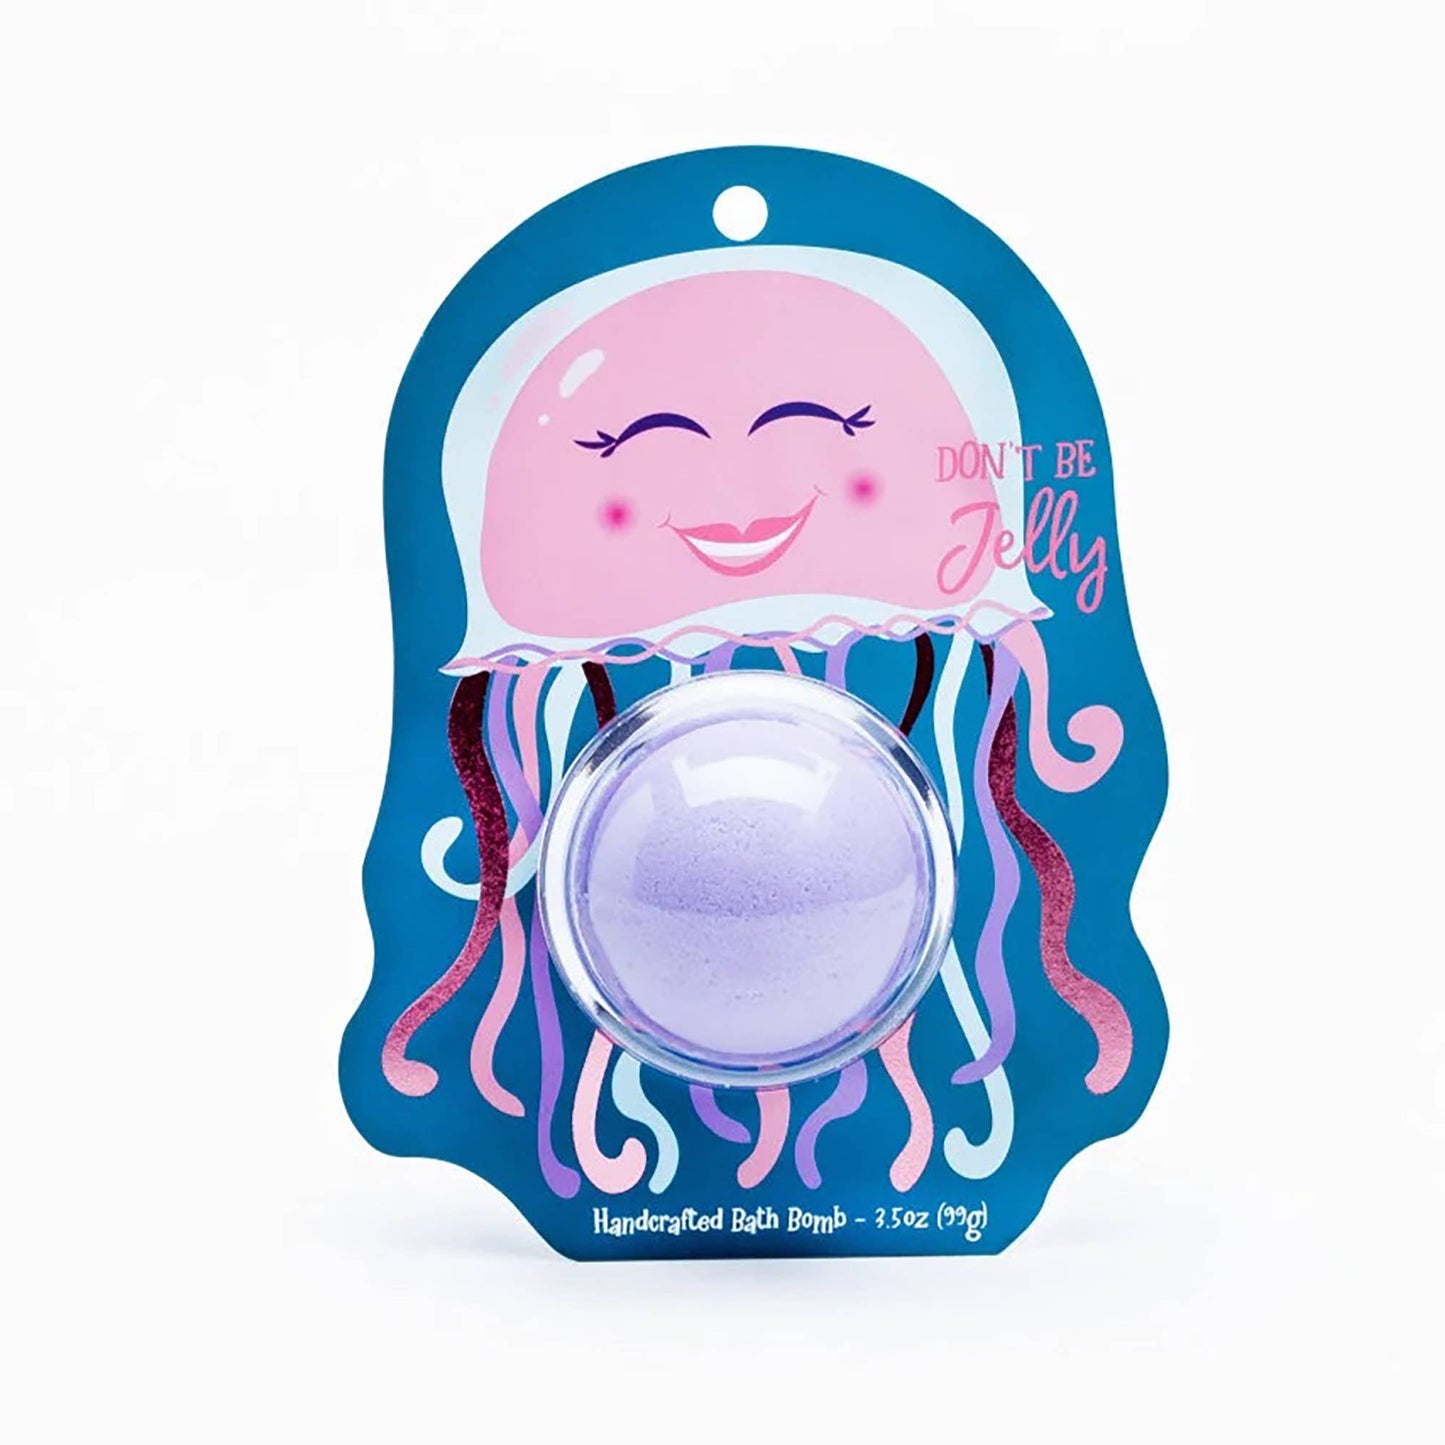 Don't Be Jelly Jellyfish Clamshell Bath Bomb